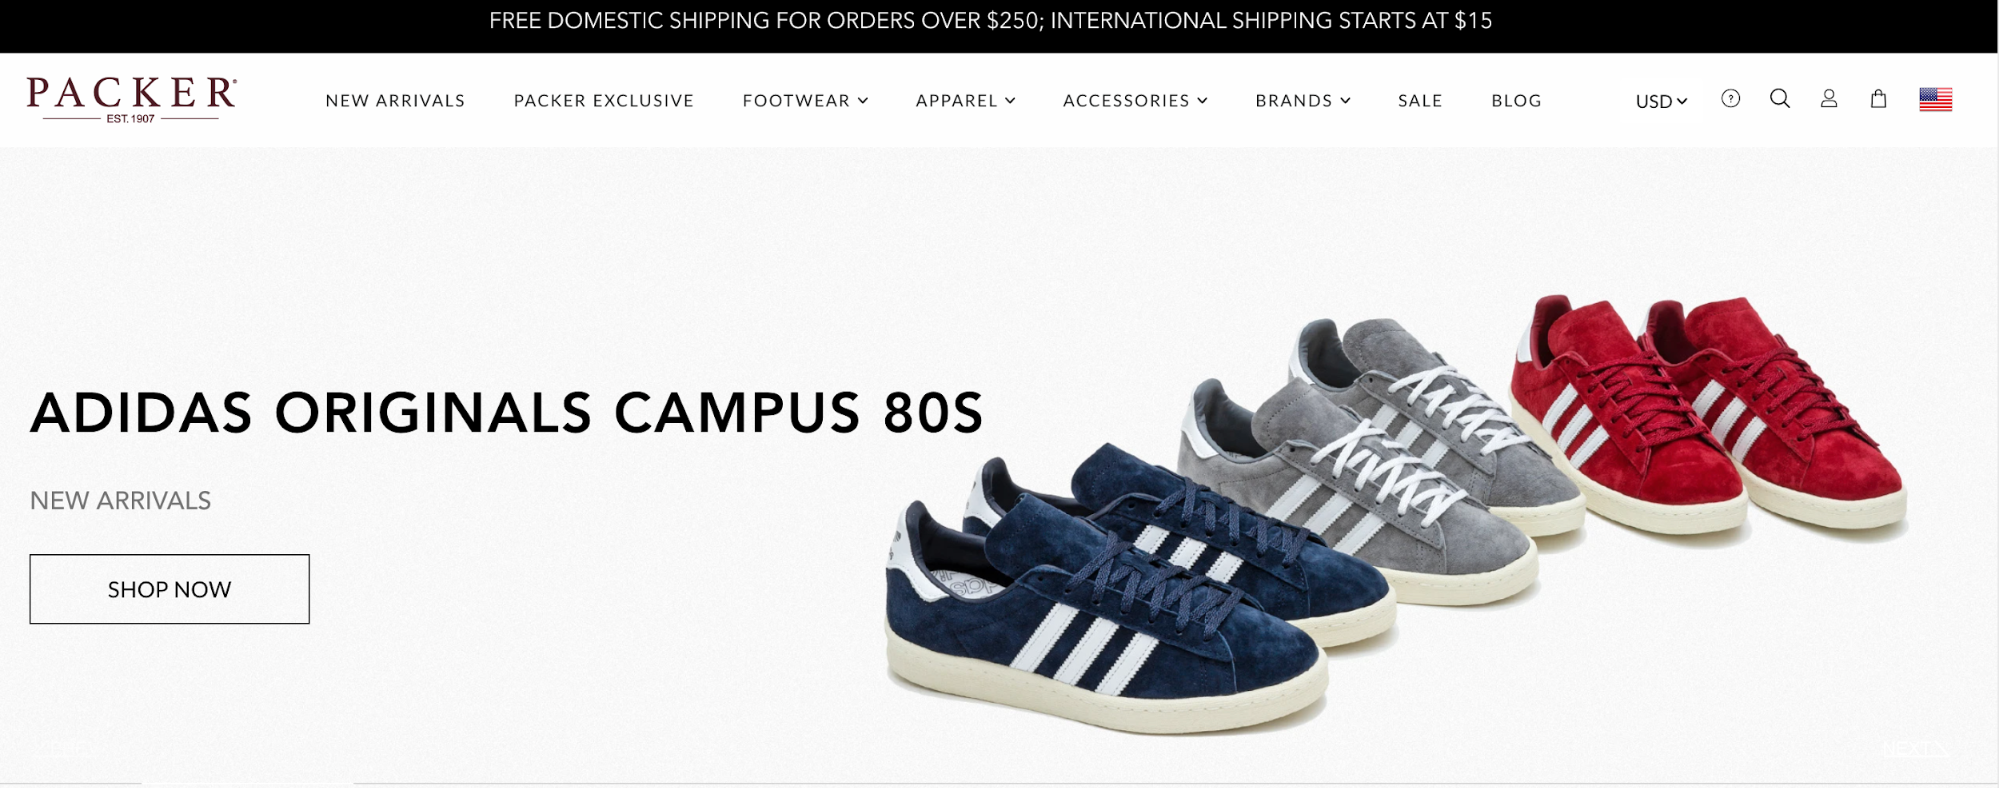 Packer Shoes homepage showcasing the Adidas sneakers they have available